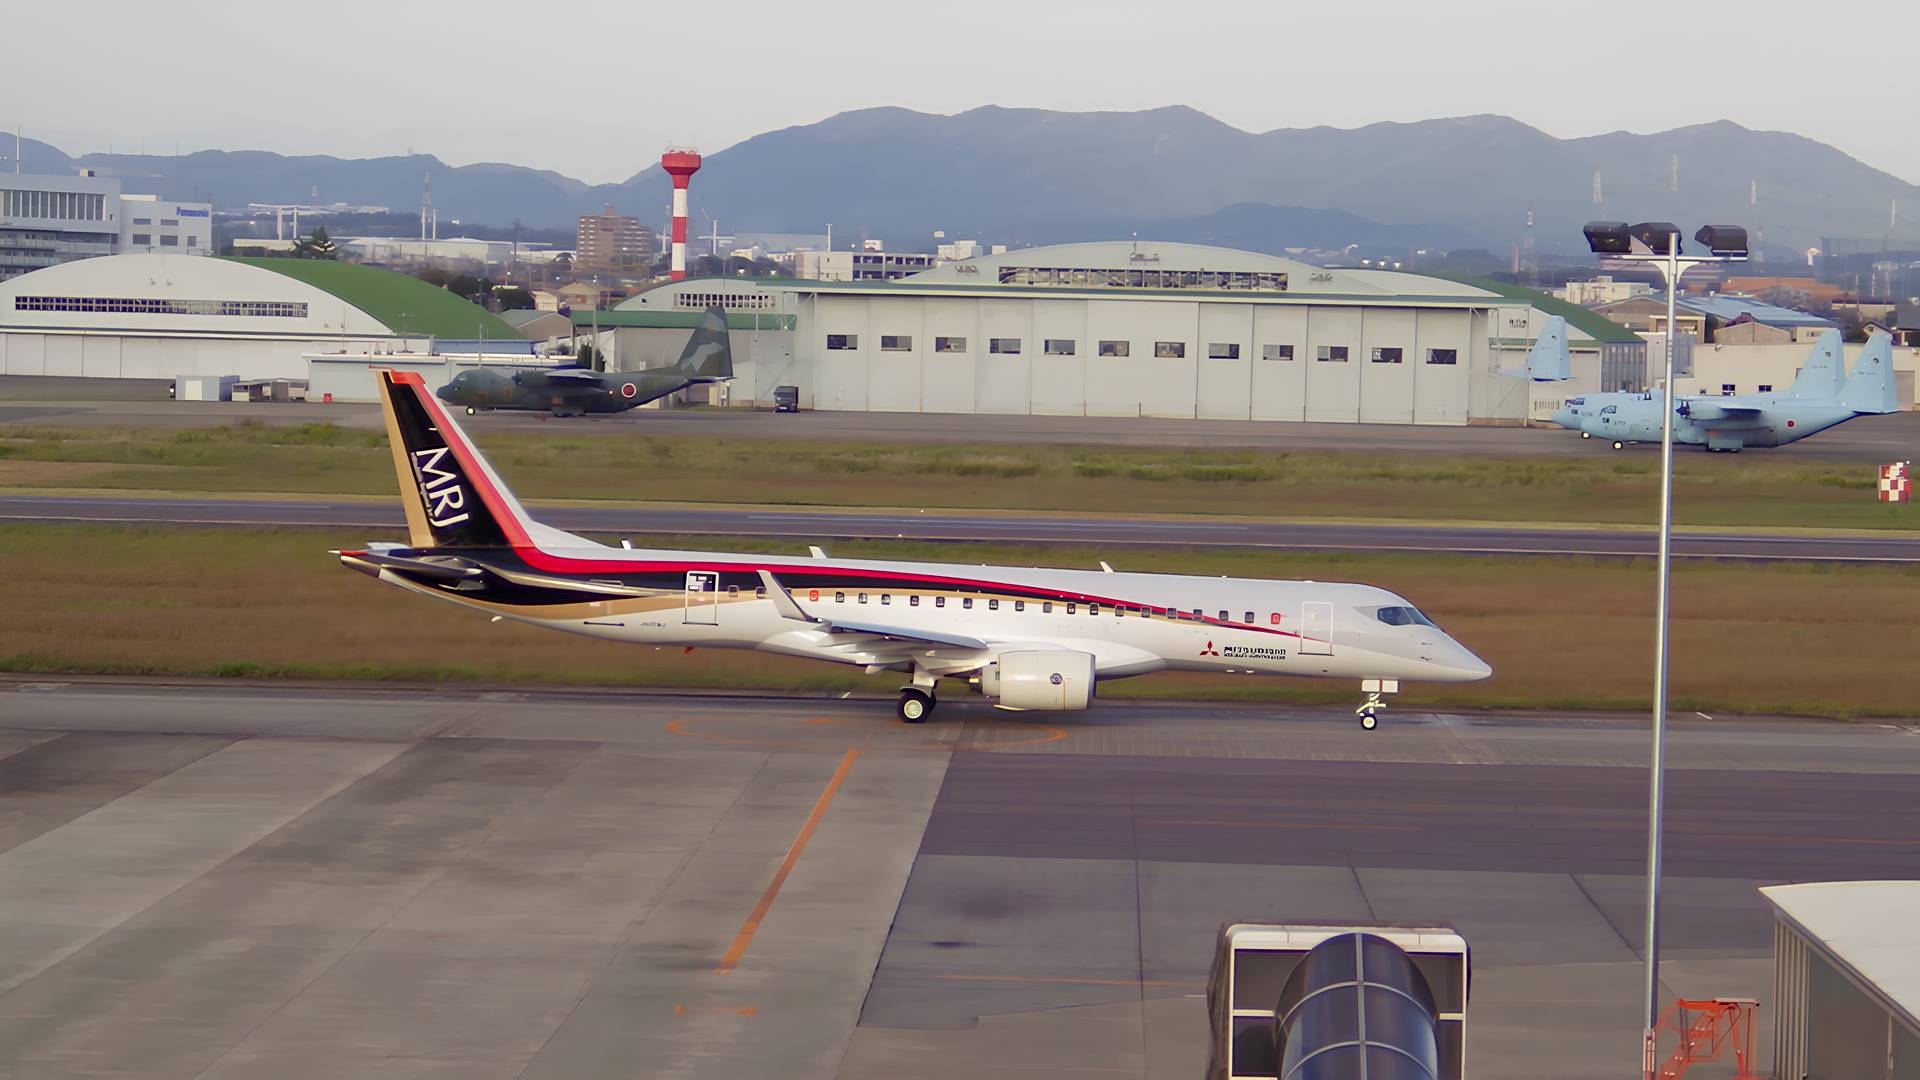 Could Mitsubishi Launch Another Airliner Design?